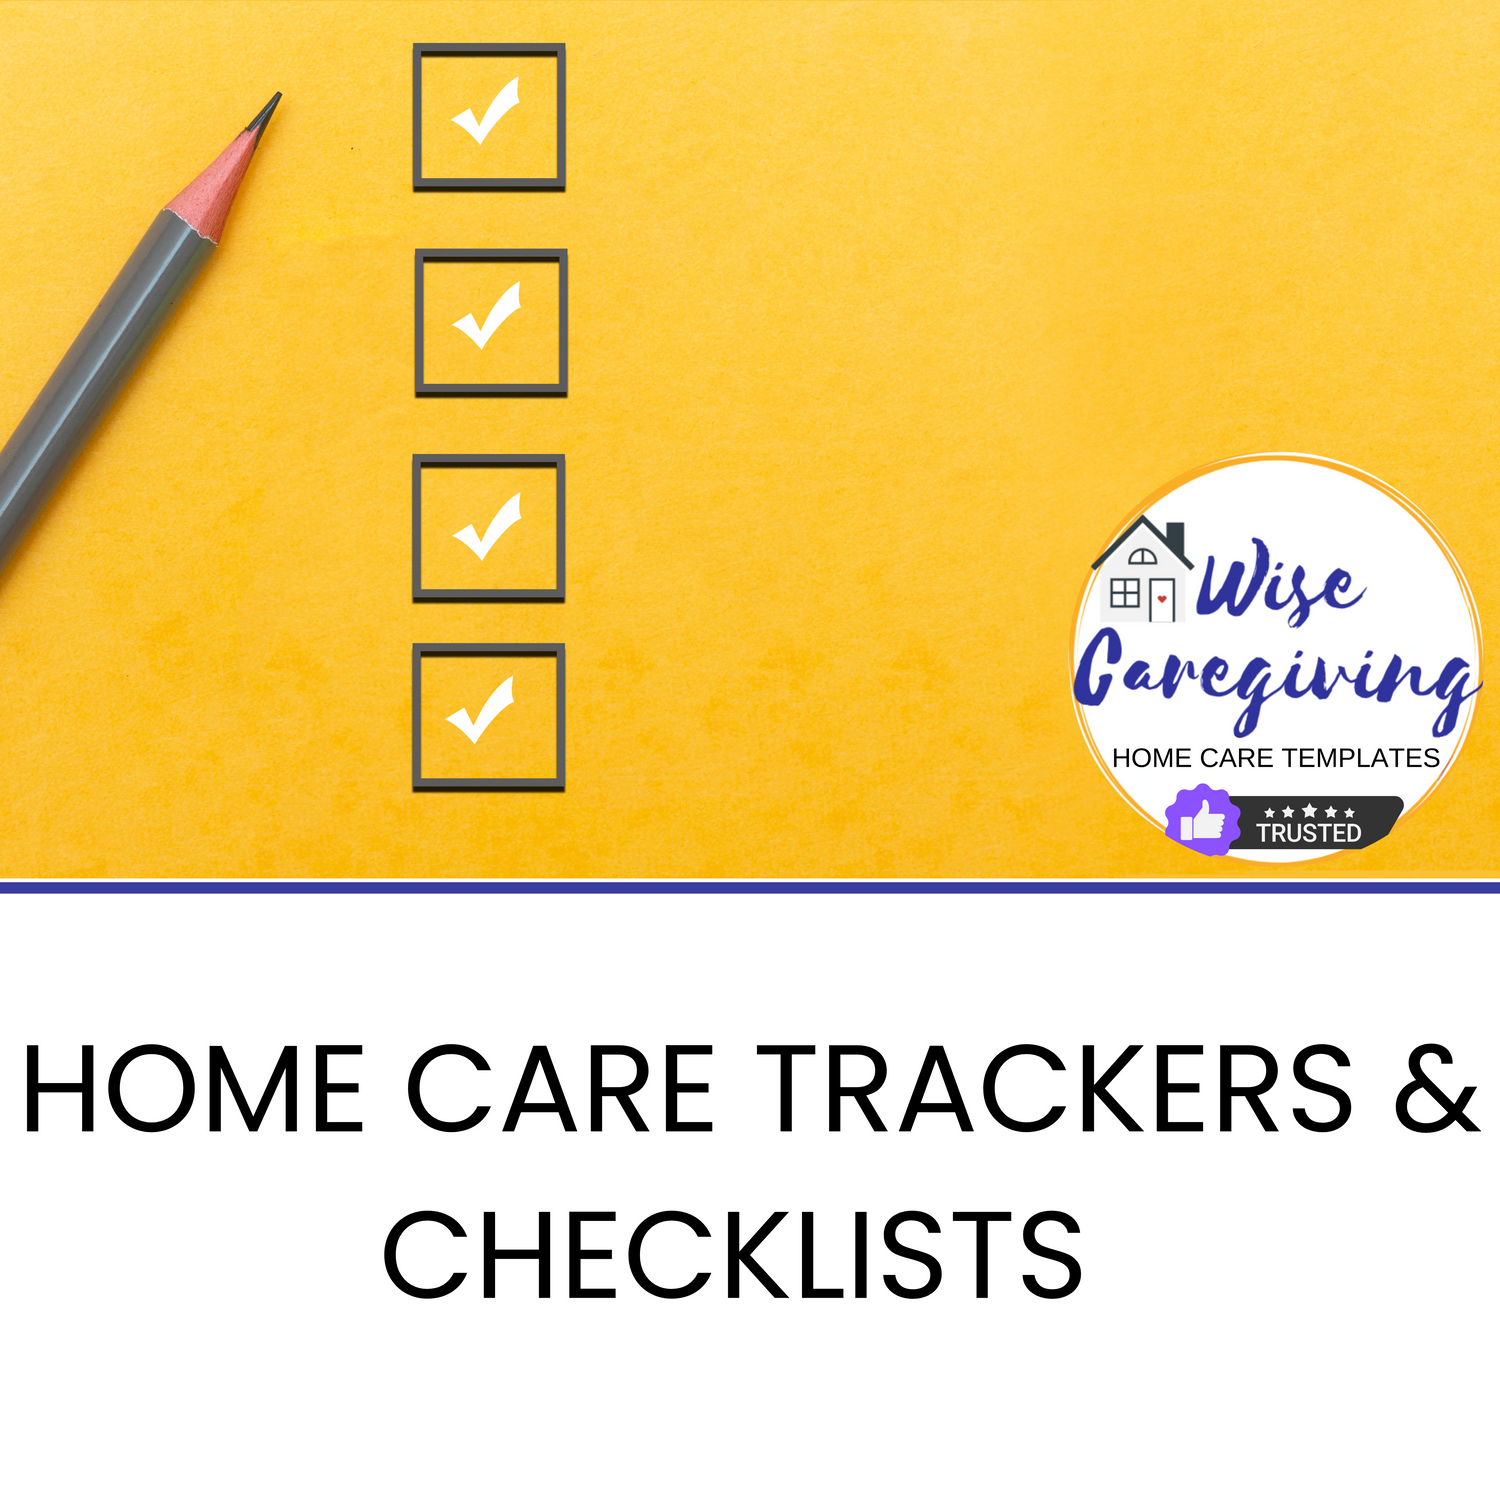 Home Care Trackers and Checklist Templates